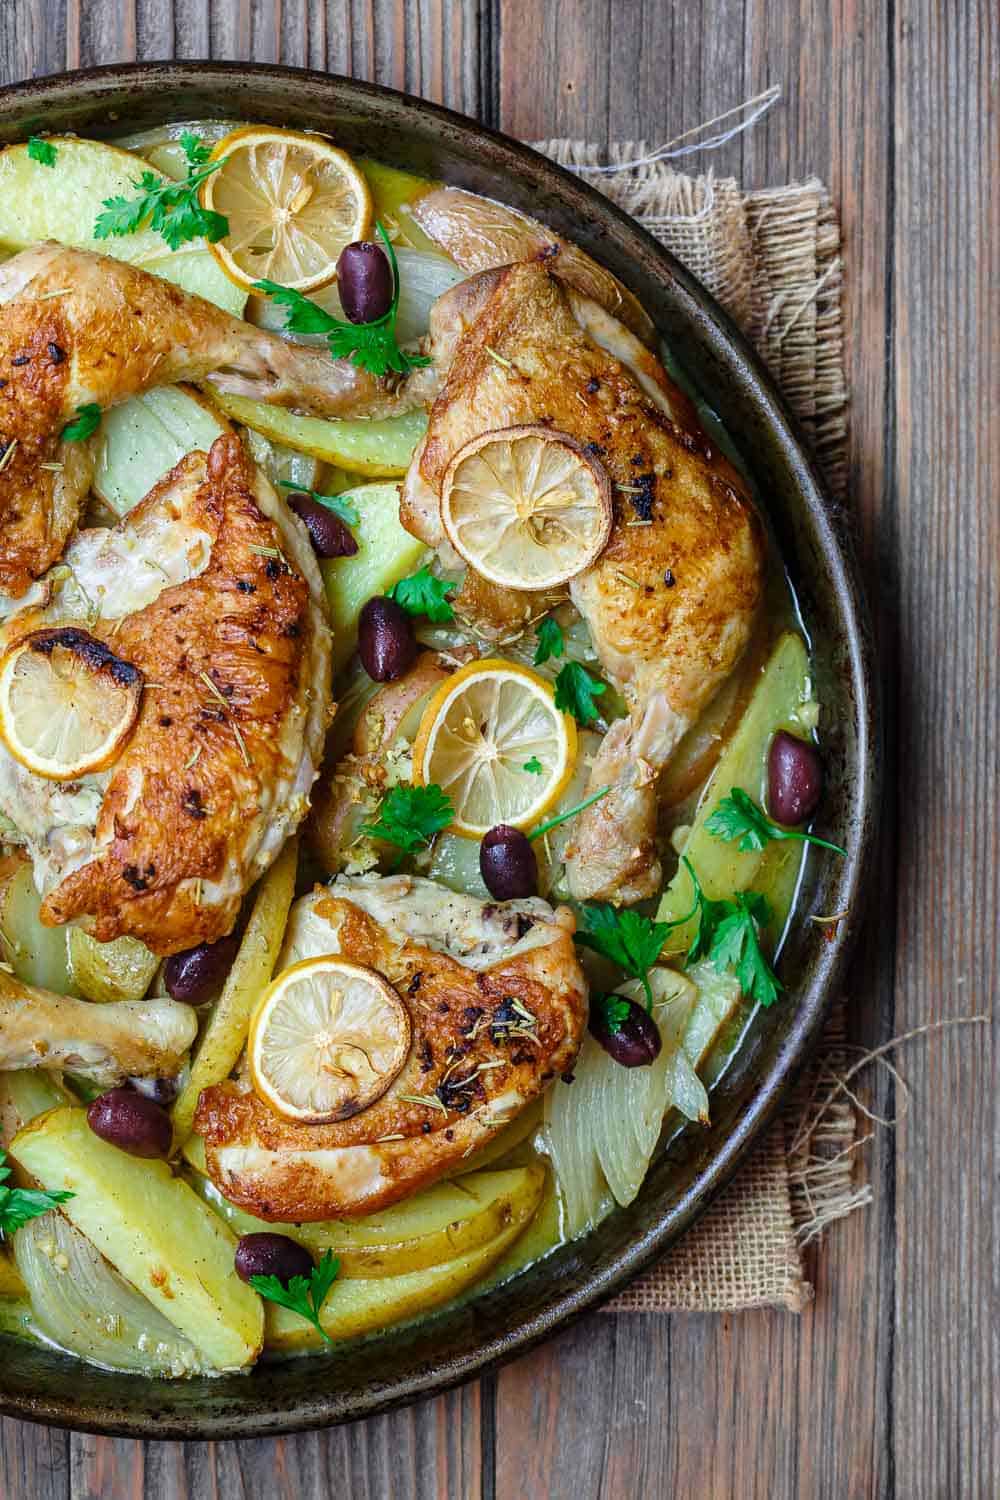 Easy Greek Chicken and Potato Dinner | The Mediterranean Dish. BEST Greek chicken and potato dinner all in one sheet pan! Seasoned with rosemary and baked in a zesty juice with lots of garlic. Definite Winner!